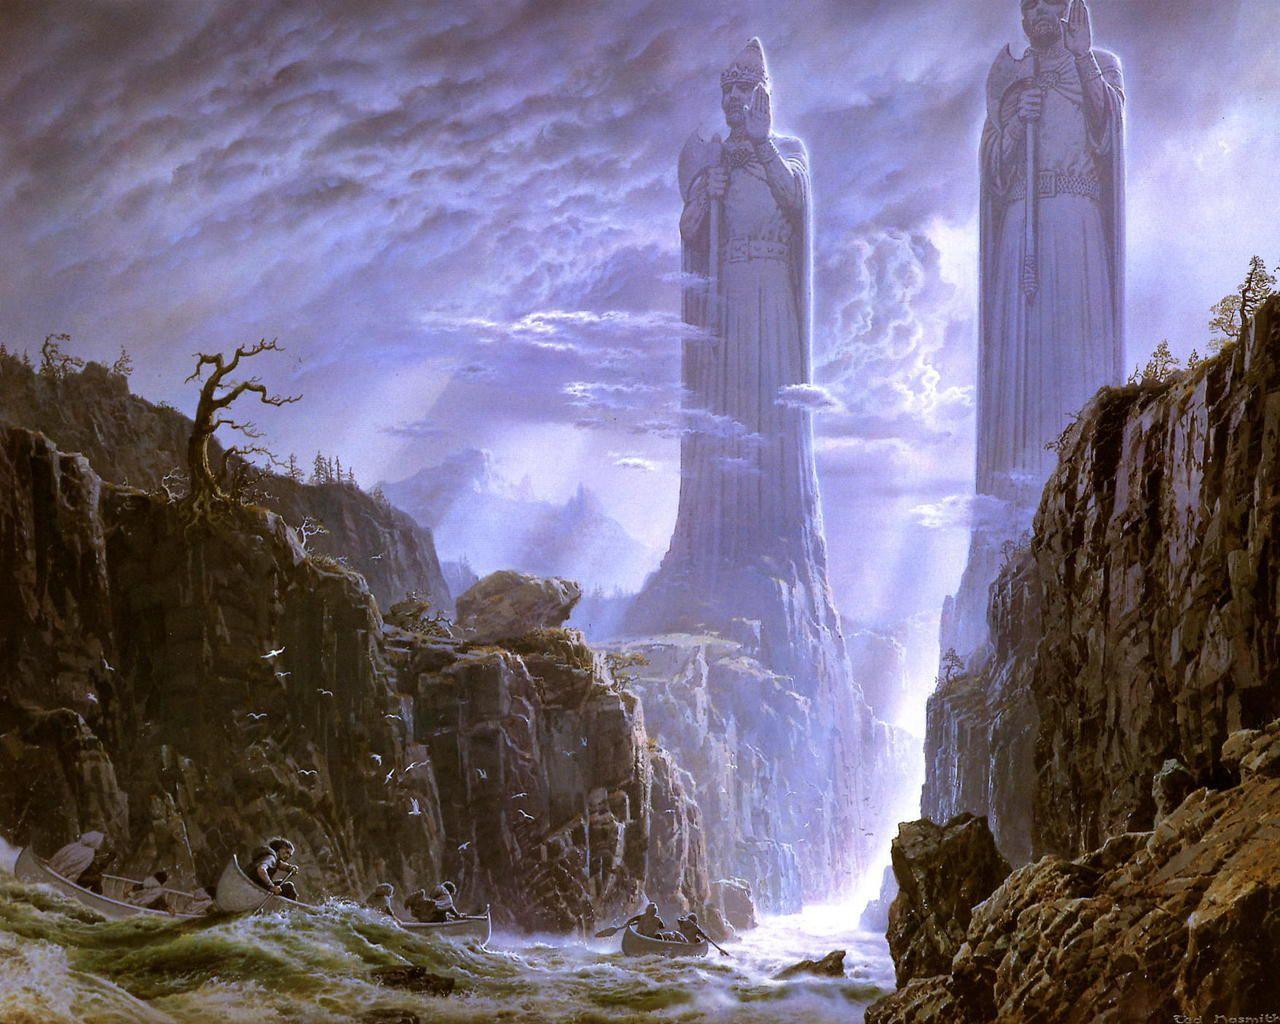 rocks, The Lord of the Rings, Argonath, statues, artwork, Ted